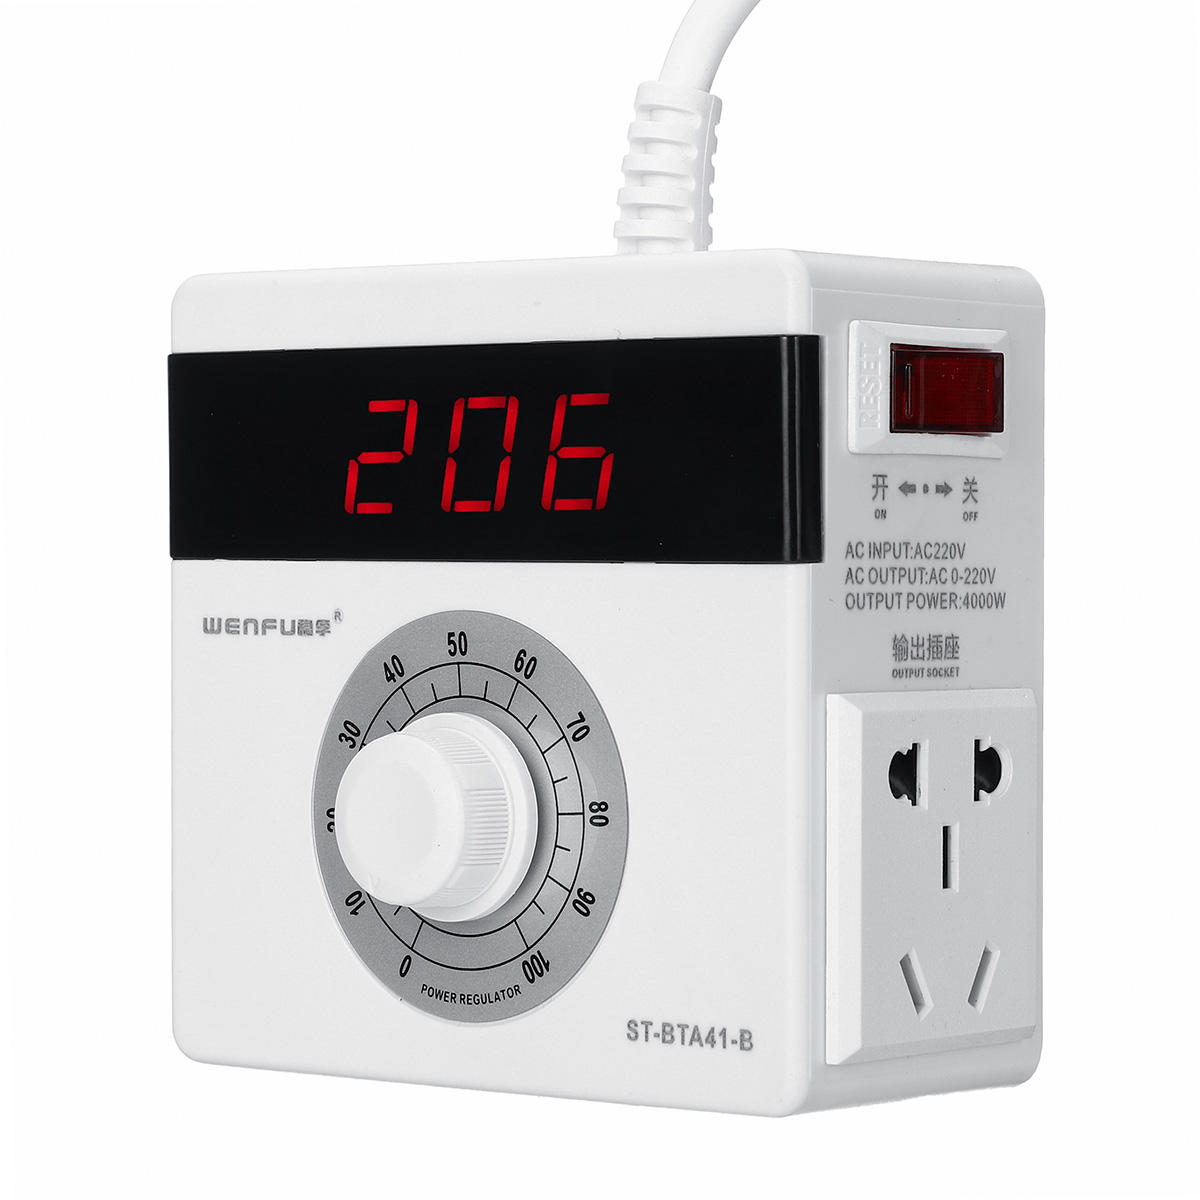 4000W AC 0-220V Adjustable Voltage Controller For Fan Speed Motor Temperature Control